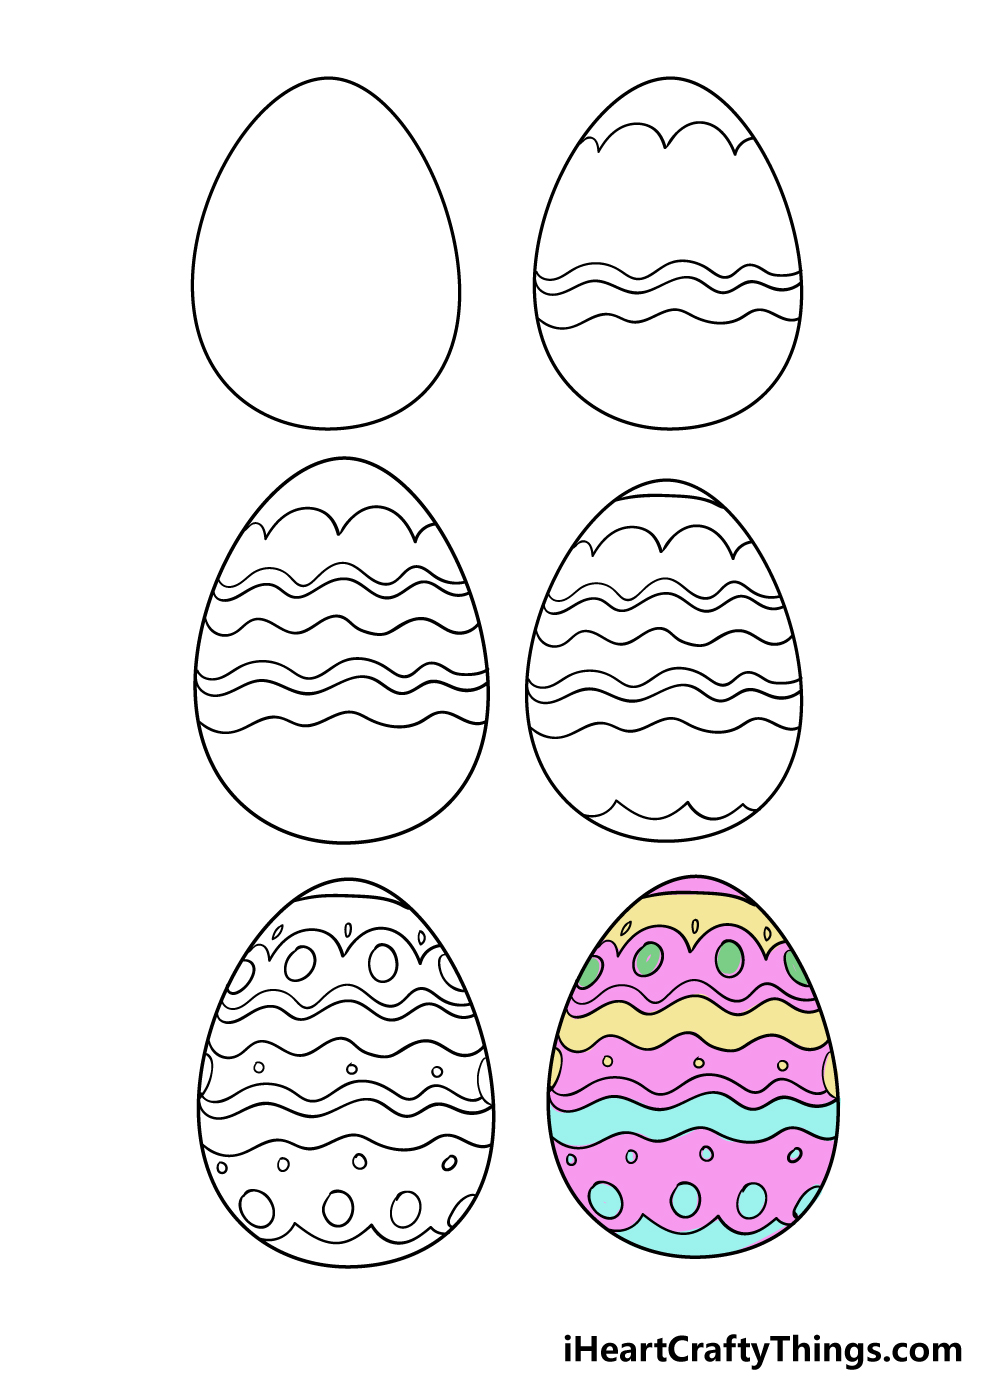 how to draw easter egg in 6 steps